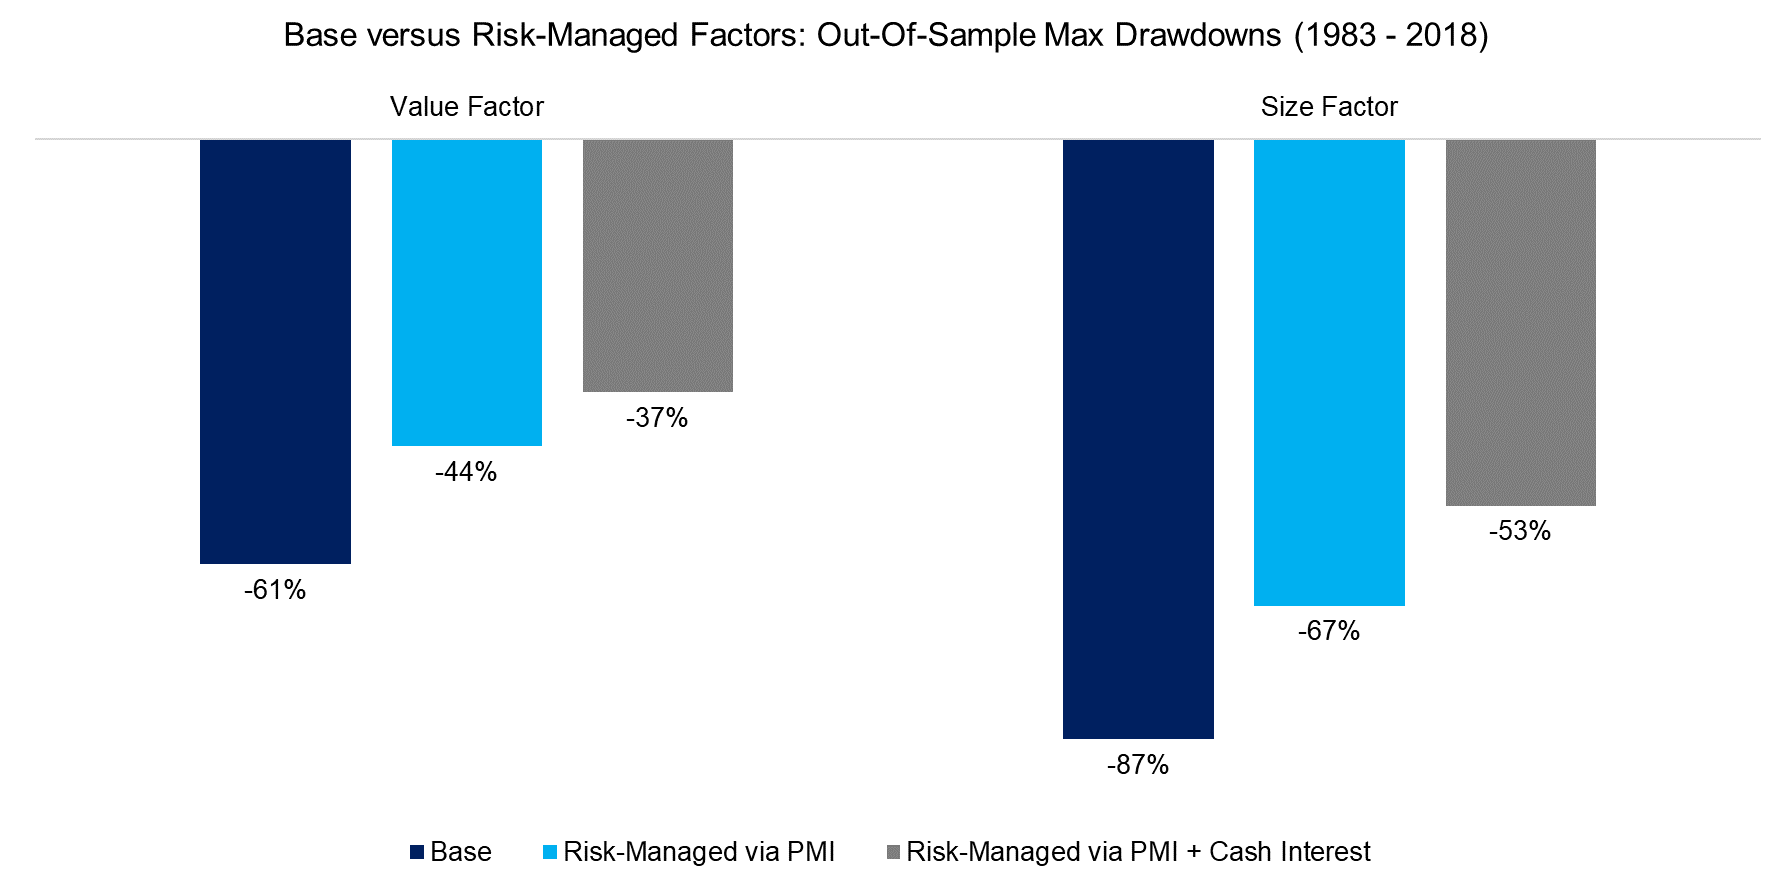 Base versus Risk-Managed Factors Out-Of-Sample Max Drawdowns